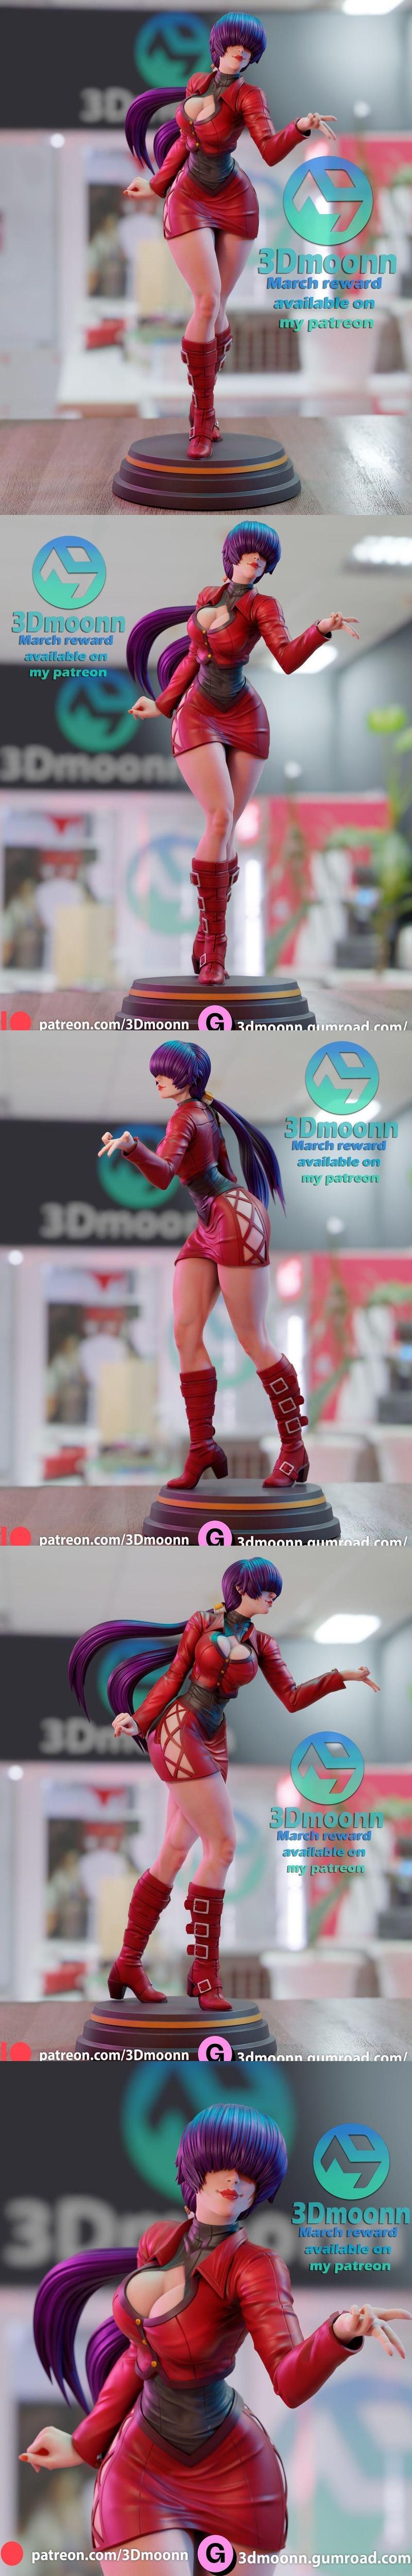 3Dmoonn – Shermie - The King Of Fighters  